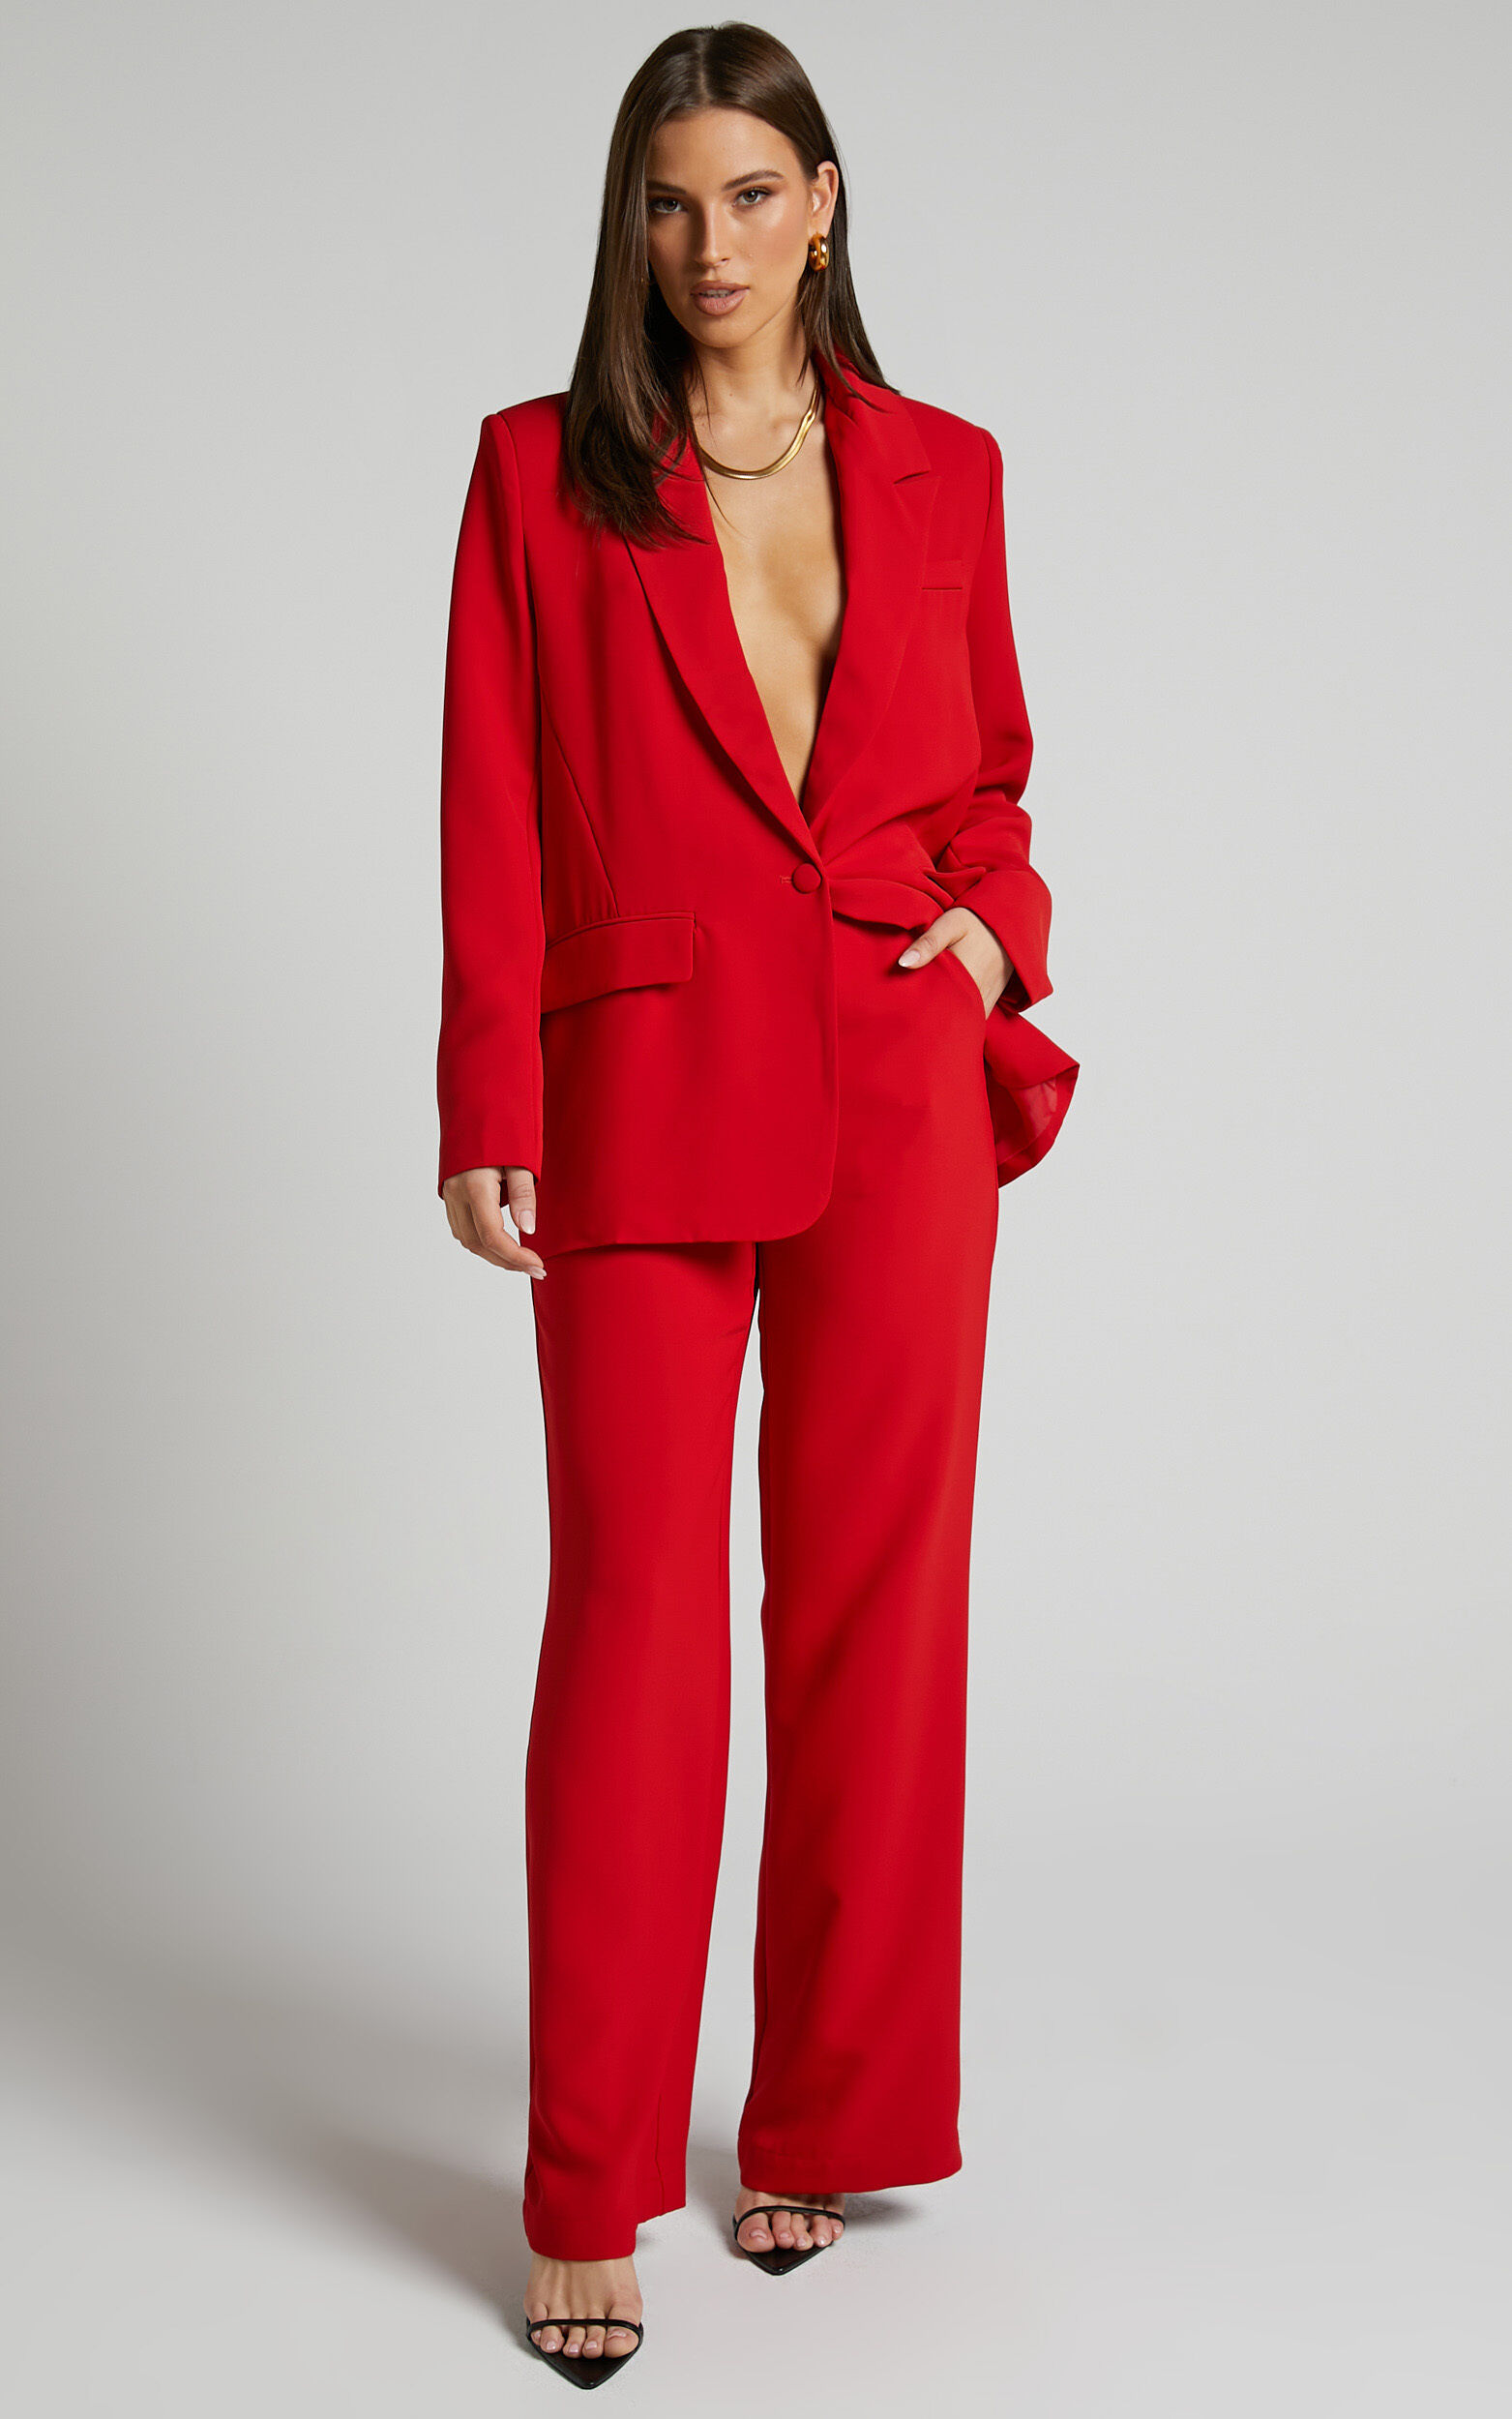 Bonnie Pants - High Waisted Tailored Wide Leg Pants in Red | Showpo